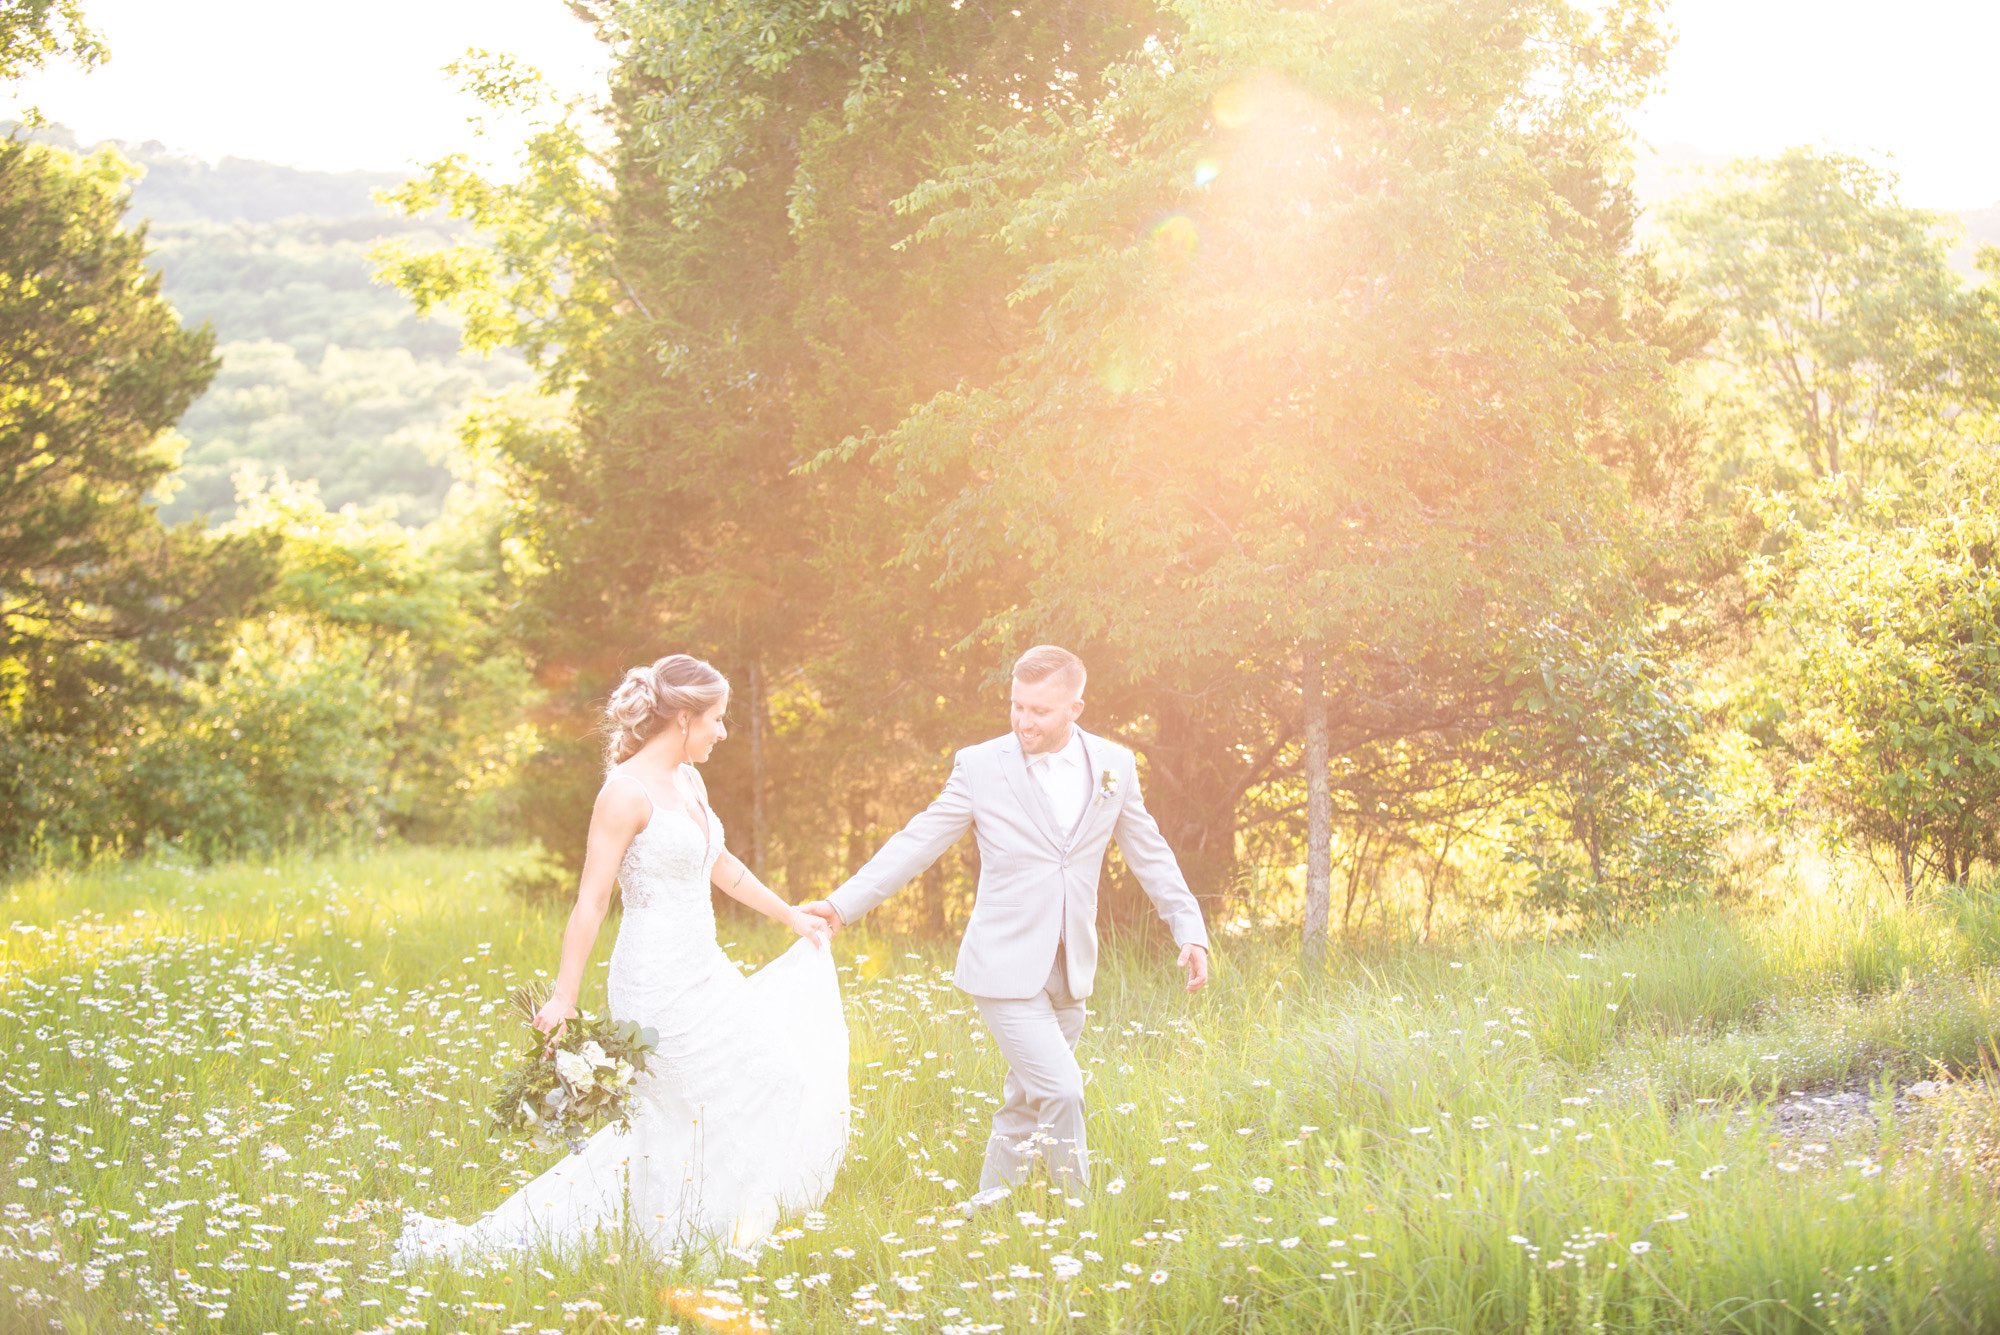 Groom leading bride by the hand in a field of flowers at sunset.